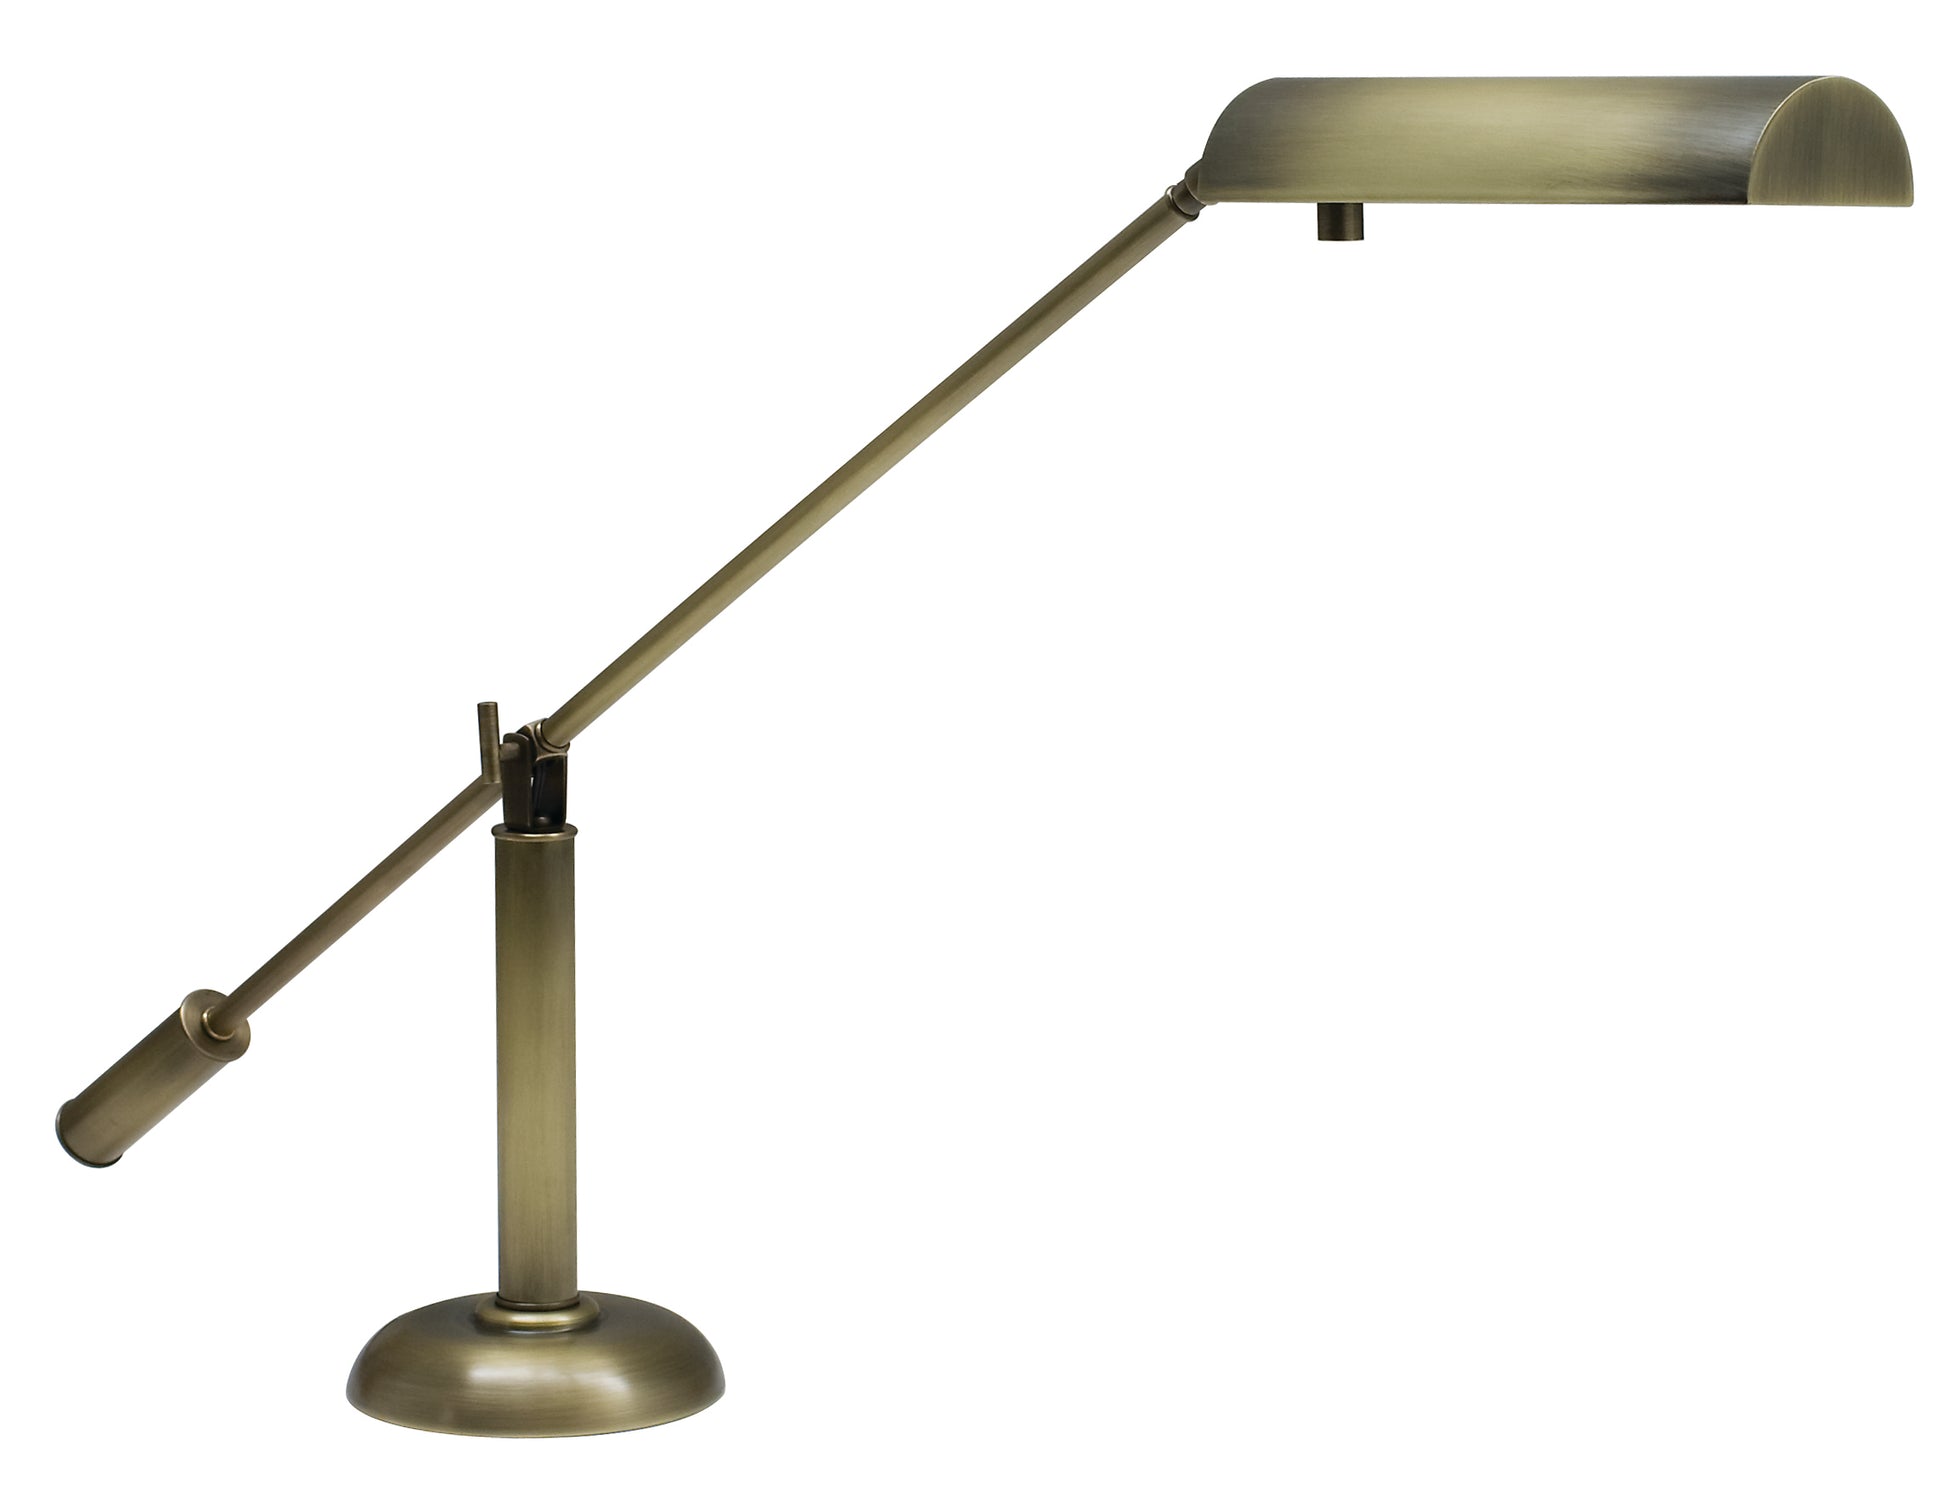 House of Troy Counter Balance Antique Brass Piano/Desk Lamp PH10-195-AB